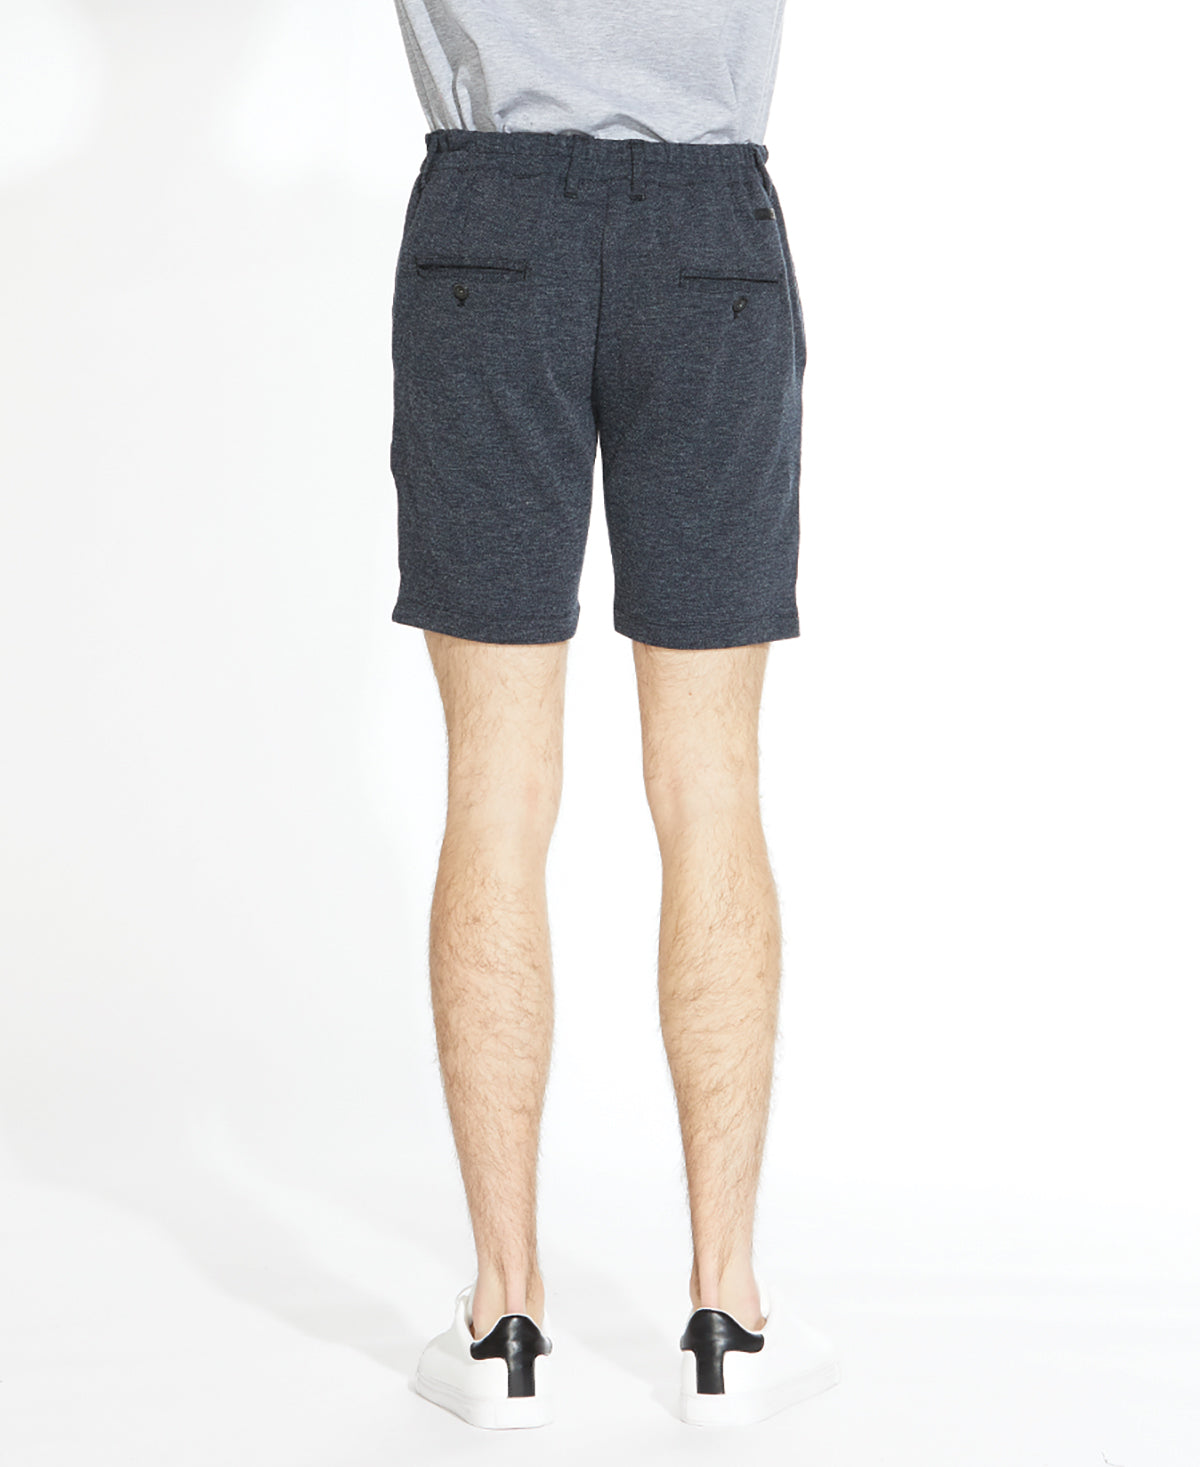 Templeton-Men's Shorts-Vixen Collection, Day Spa and Women's Boutique Located in Seattle, Washington